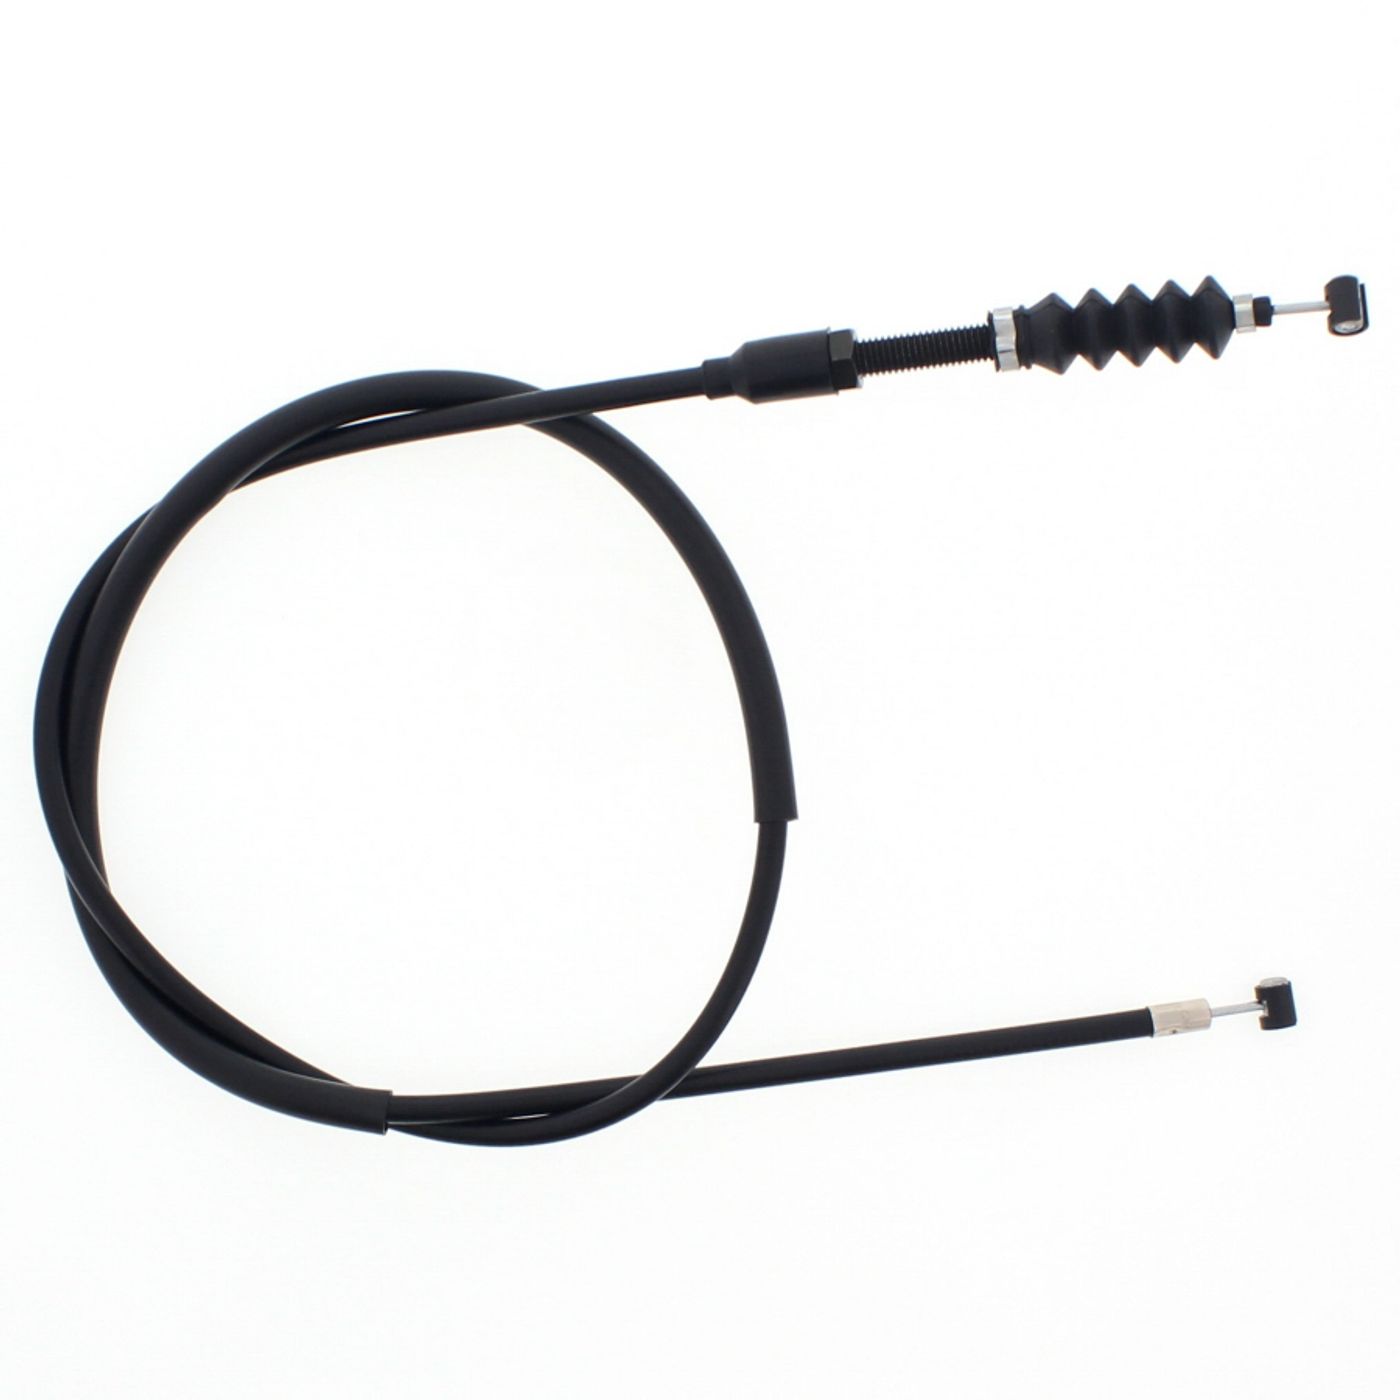 Wrp Clutch Cables - WRP452068 image